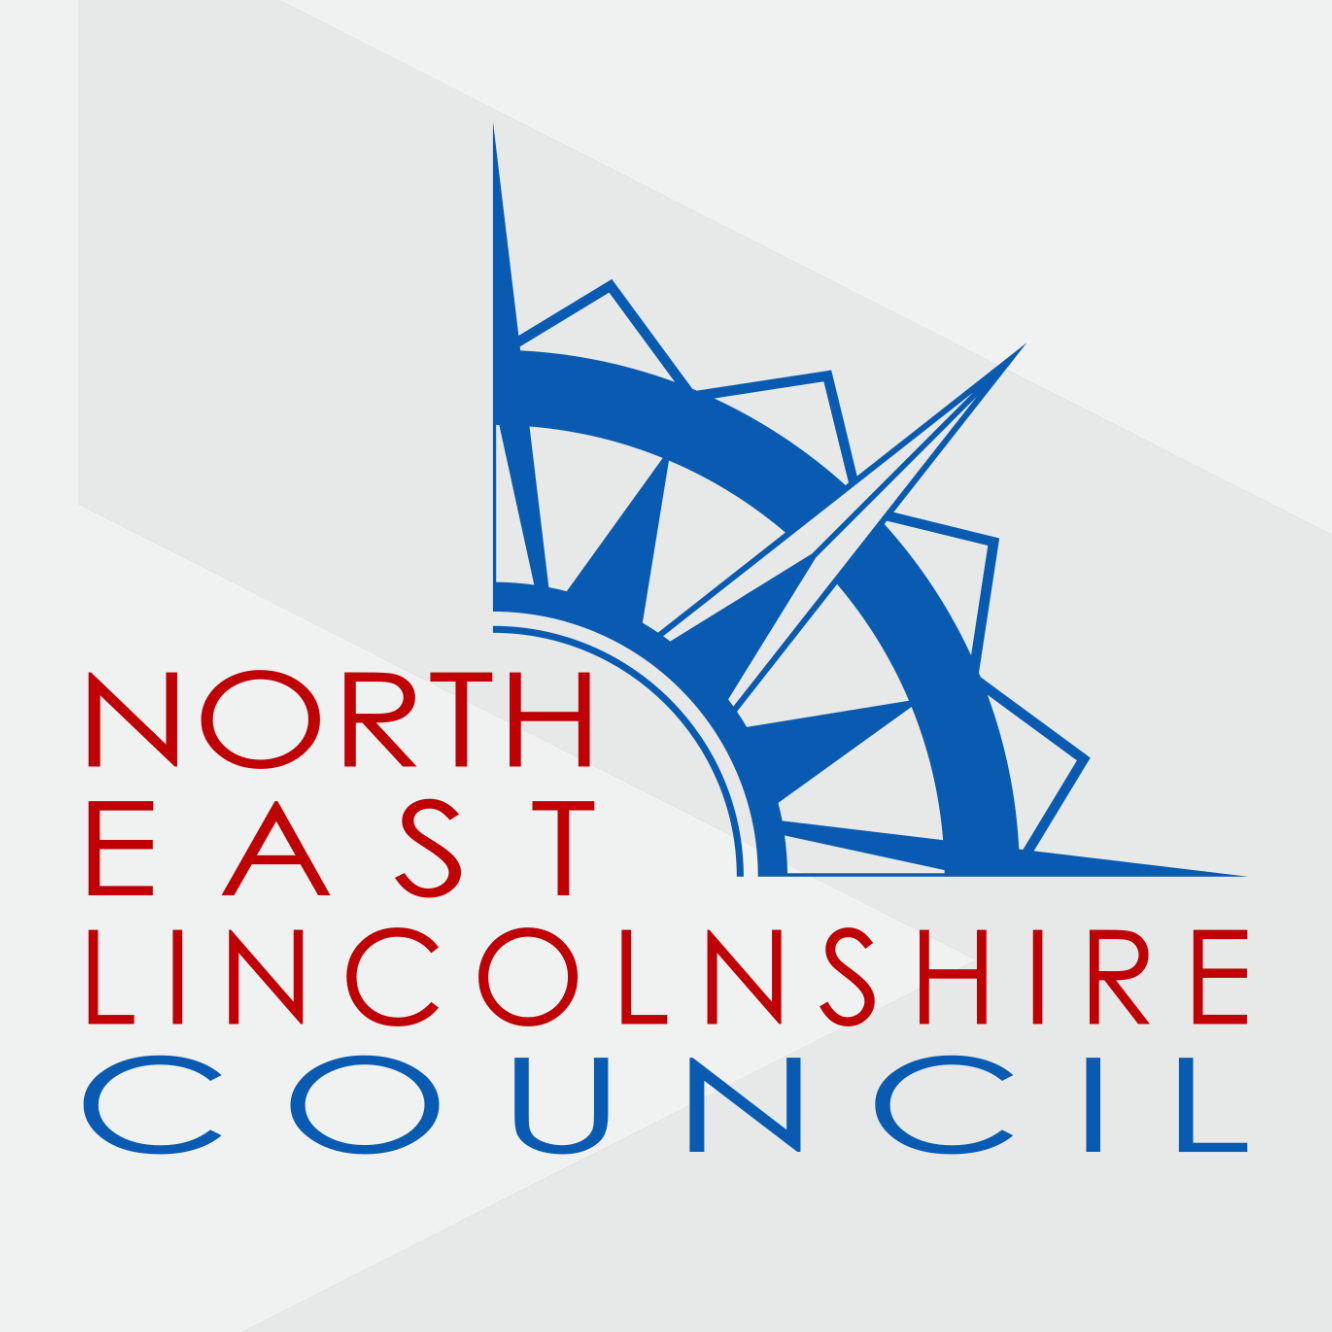 North East Lincolnshire Council case study